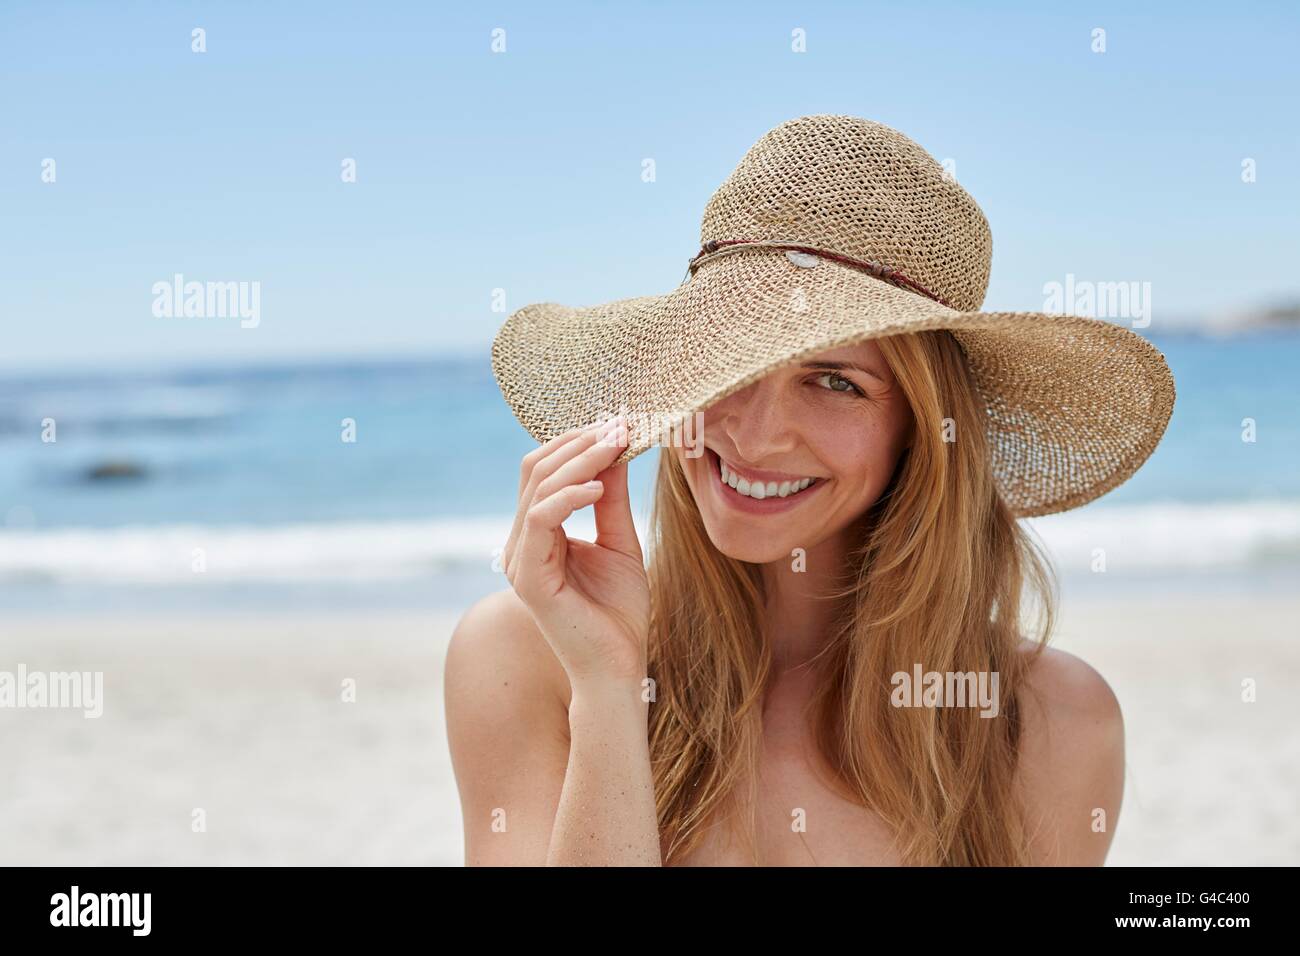 https://c8.alamy.com/comp/G4C400/model-released-young-woman-wearing-a-sunhat-portrait-G4C400.jpg